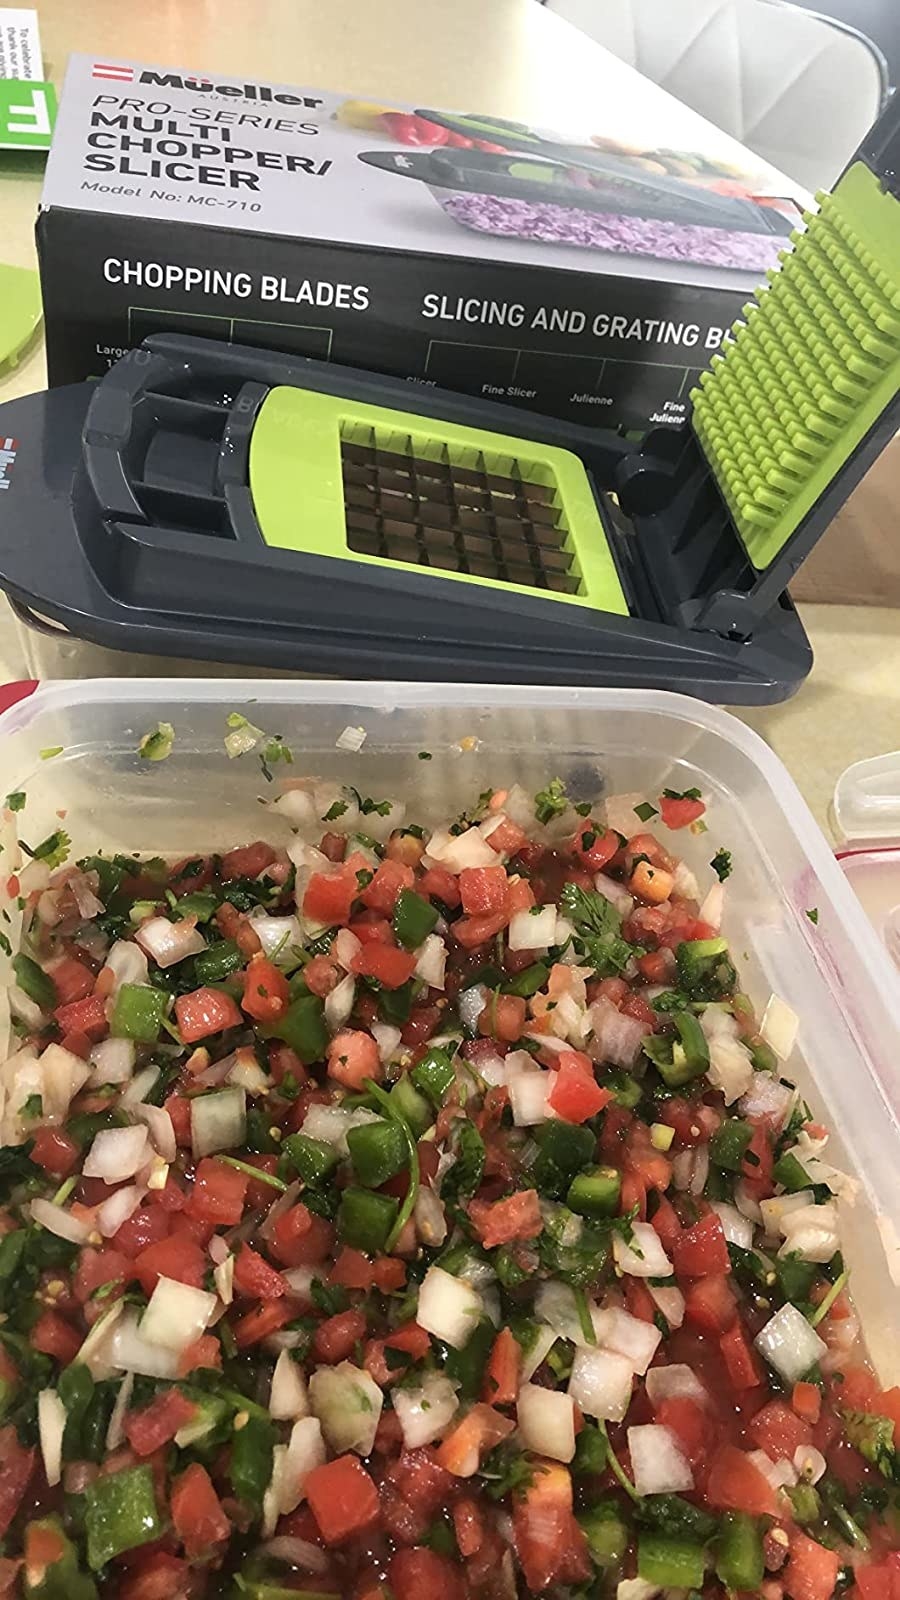 reviewer image of a bowl of salsa next to the dicer